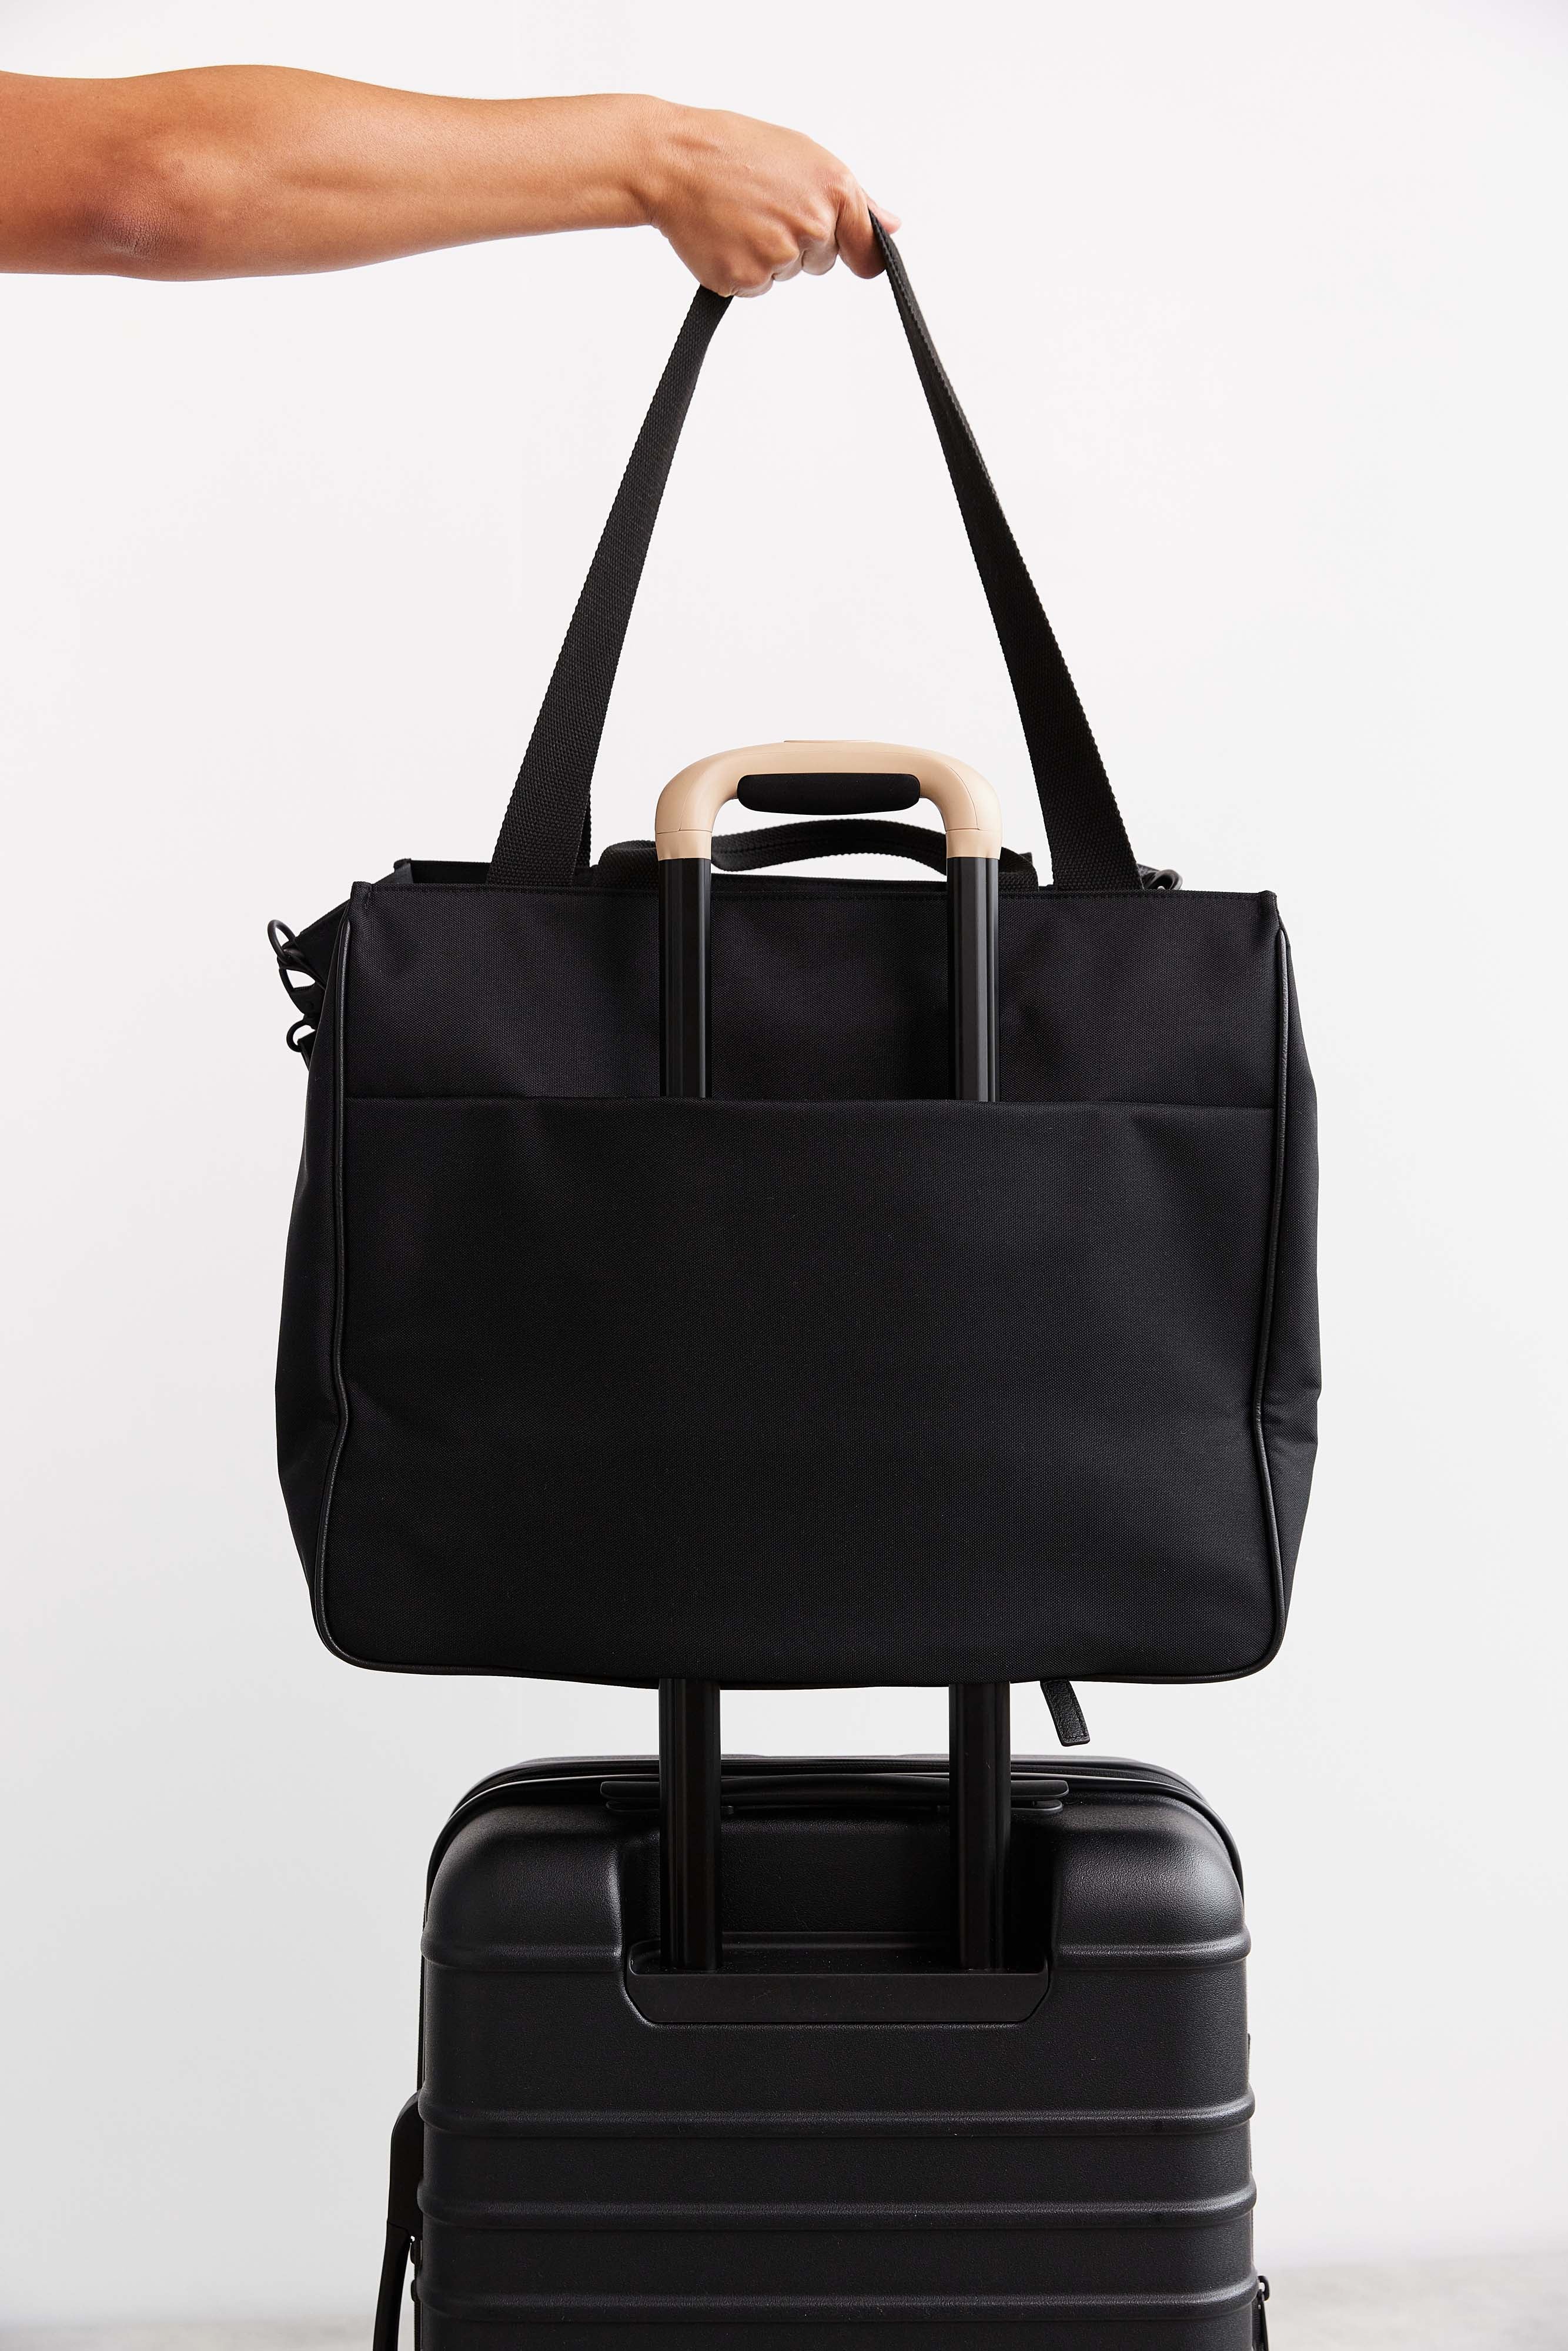 Here's your sign to get the Marc Jacobs Tote Bag for Summer | Marc jacobs  tote, Tote, Bags